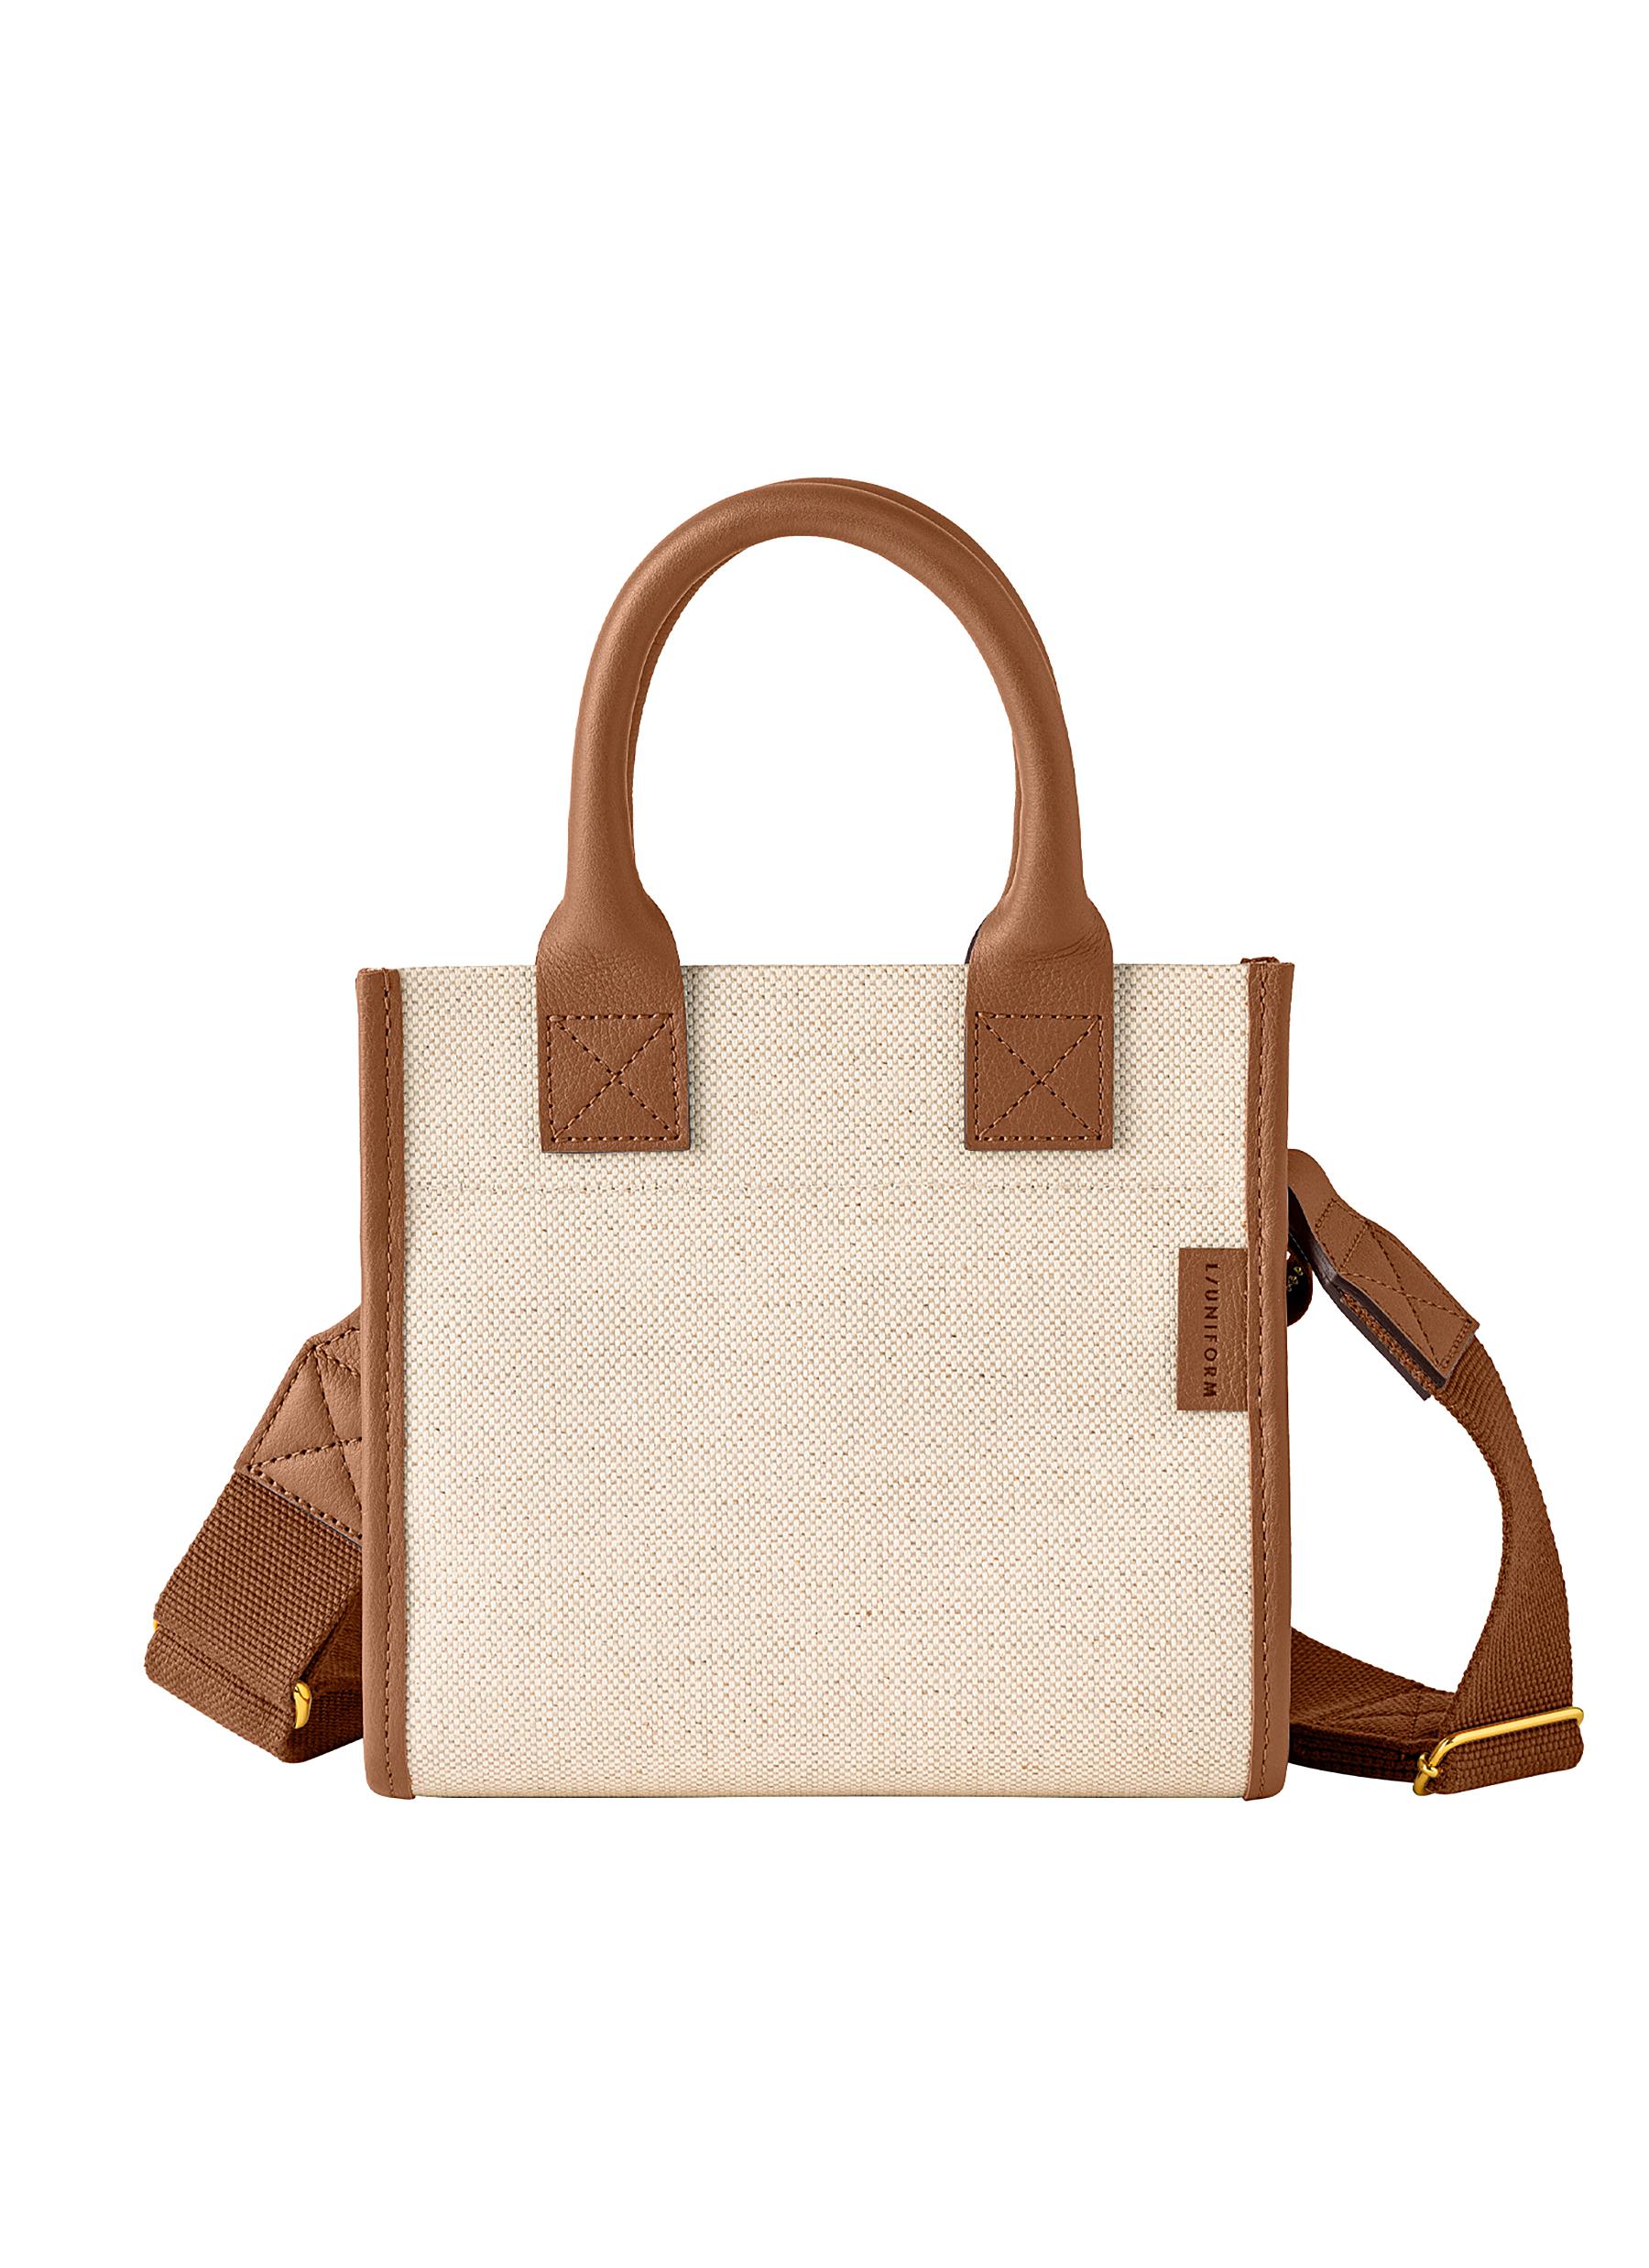 The Miniature Carry-All Tote Bag N°183